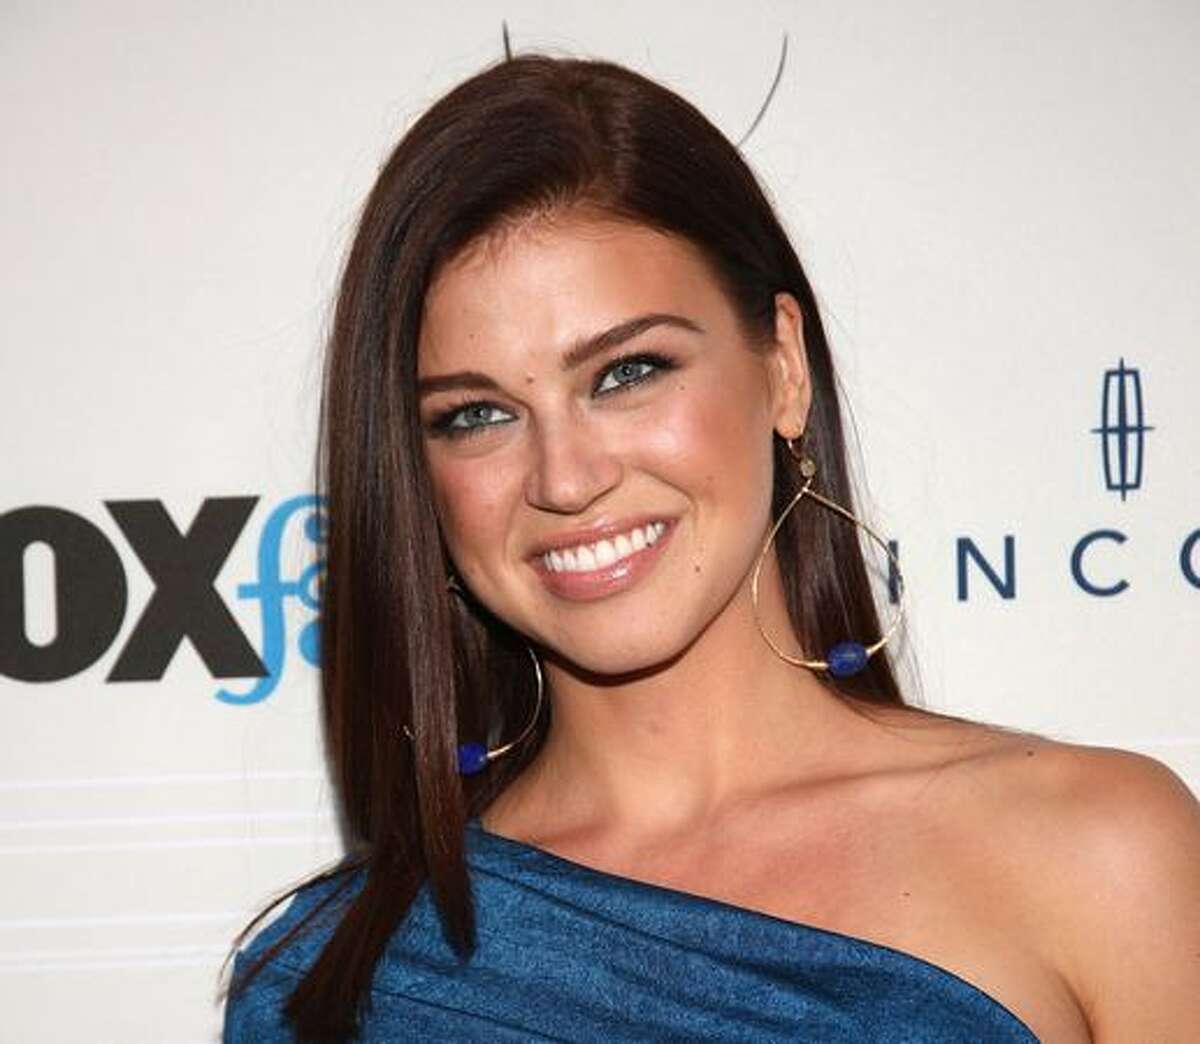 Actress Adrianne Palicki attends a Fox network event in West Hollywood, Calif., in this September 2010 file photo.